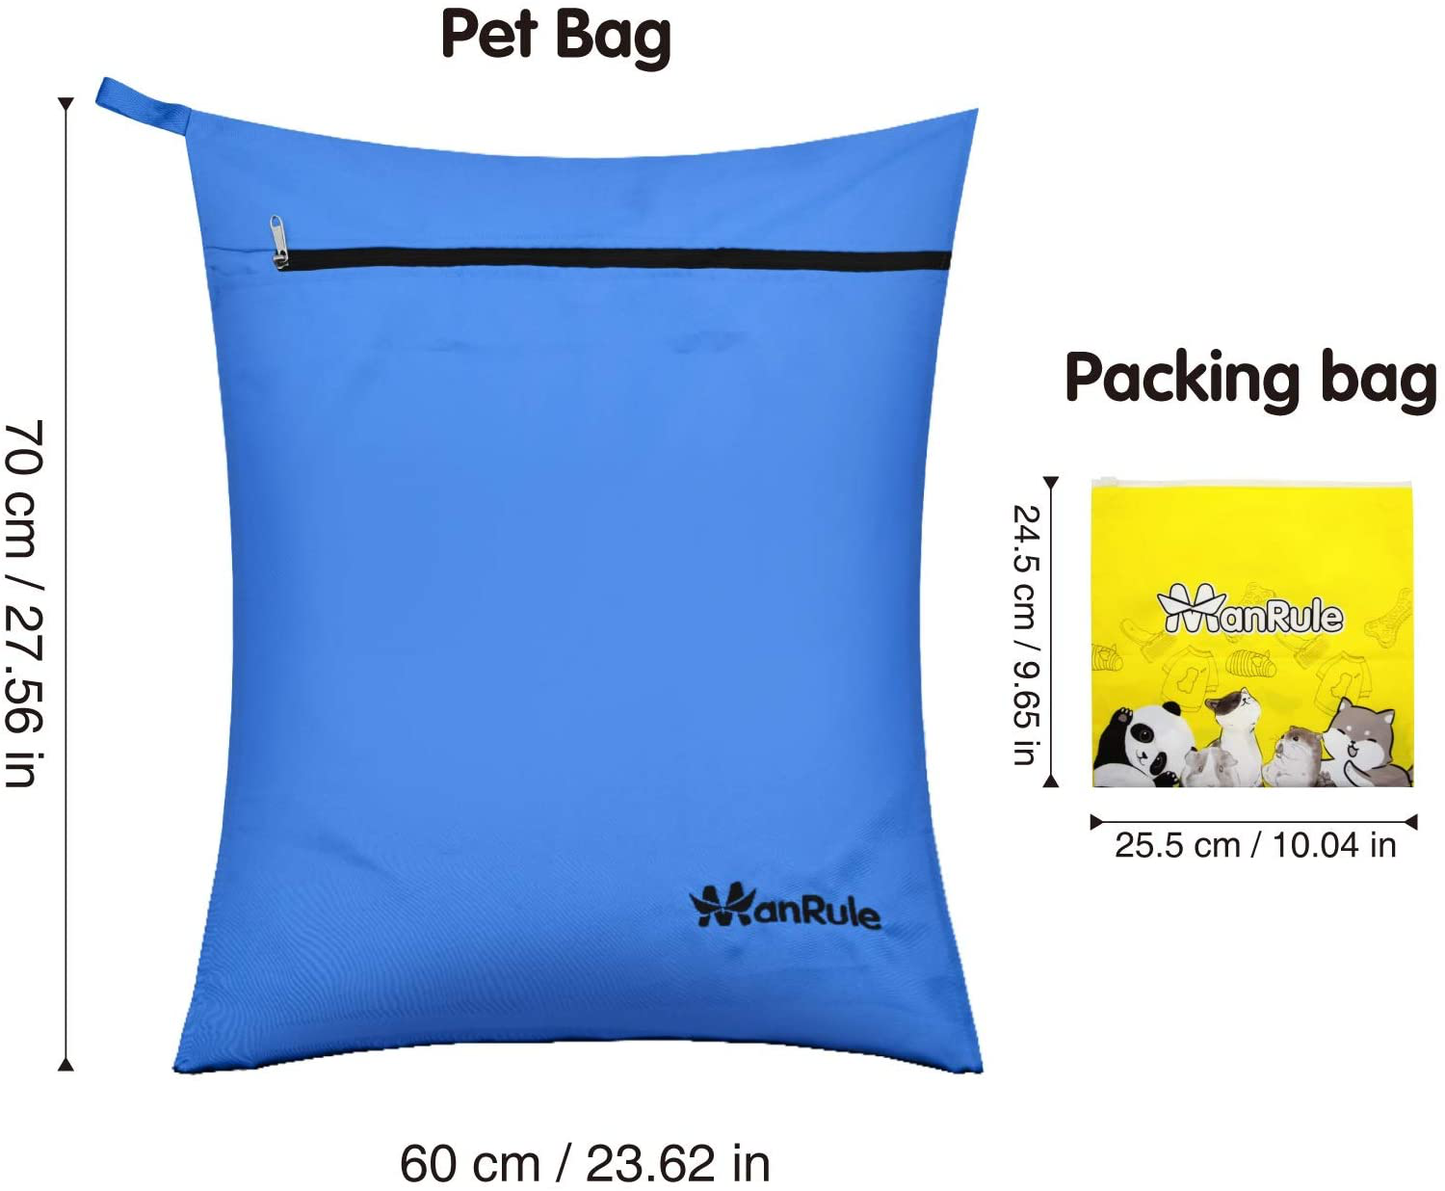 Manrule Pet Laundry Bag for Washing Machine Oversize Hair Remover Bag for Pet Beds, Fleece, C&C Cage Liners, Midwest Cage Liners, for Dogs, Cats, Guinea Pigs, Rabbits and Small Pets (Blue)